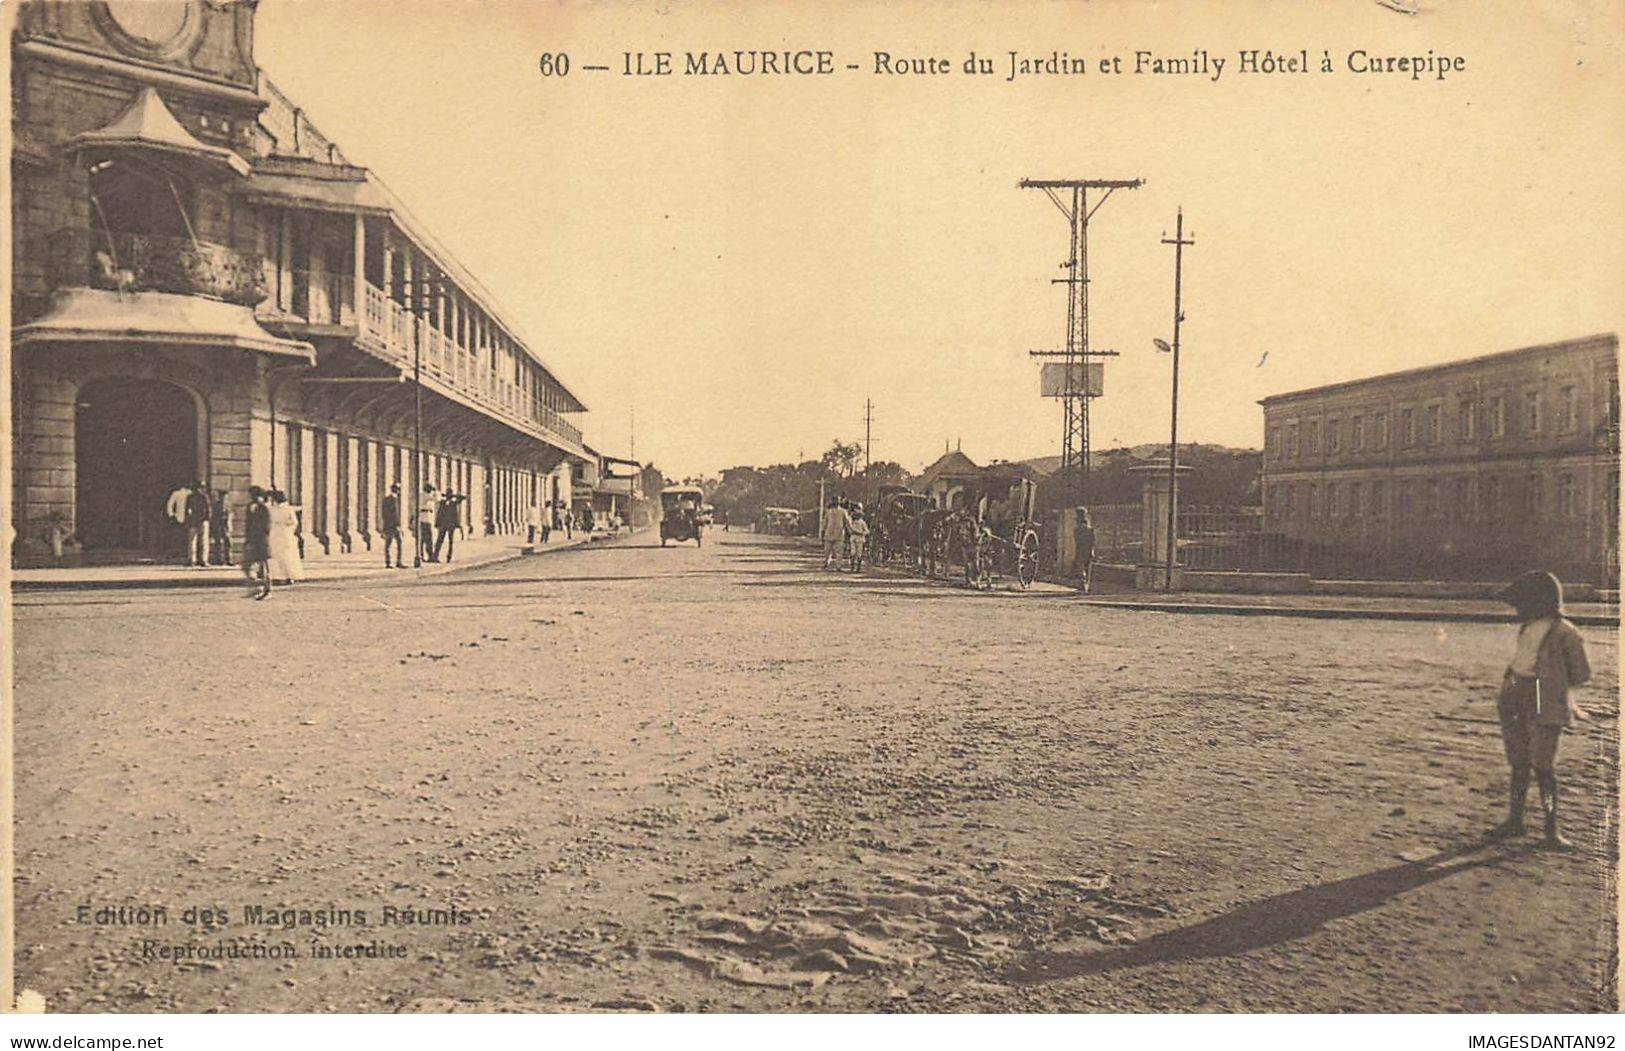 MAURICE #MK53409 ILE MAURICE ROUTE DU JARDIN ET FAMILY HOTEL A CUREPIPE - Maurice